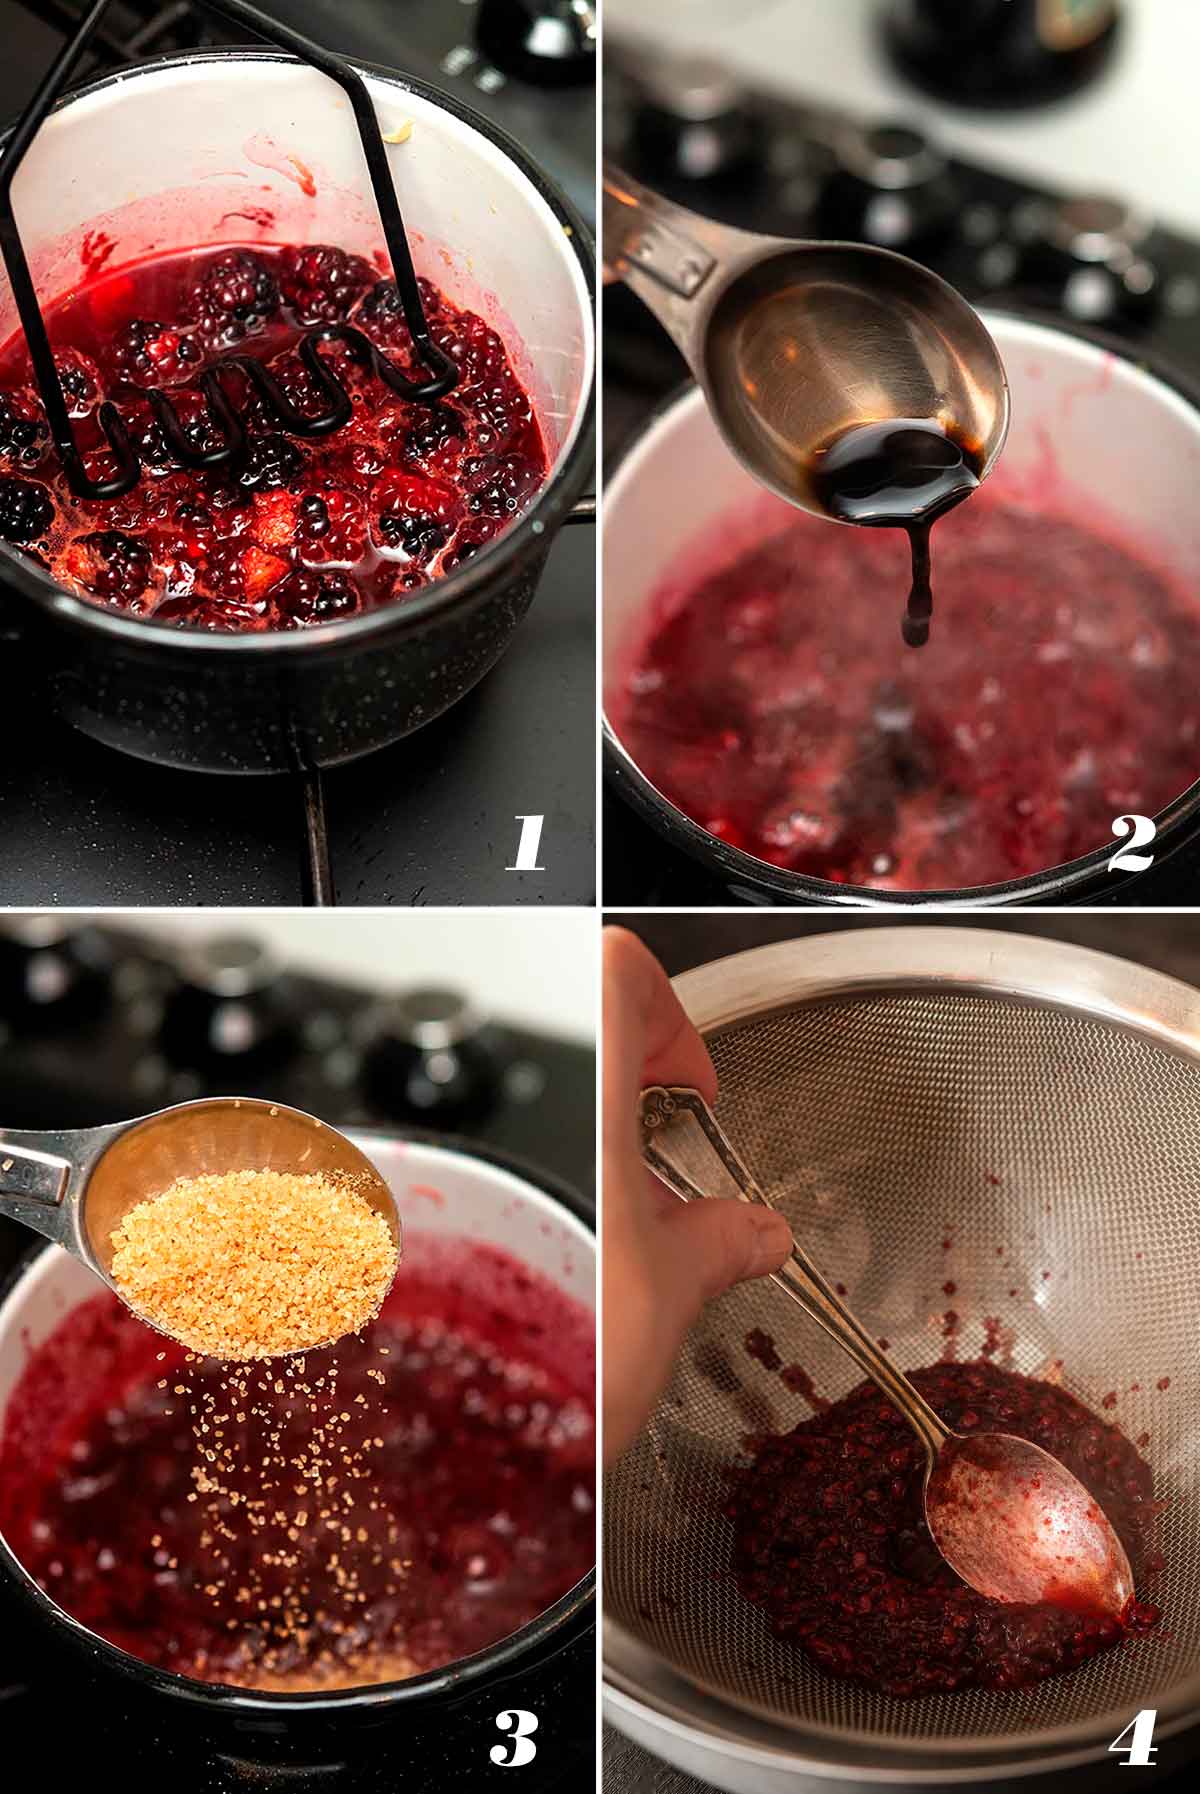 A collage of 4 numbered images showing how to make seedless blackberry sauce